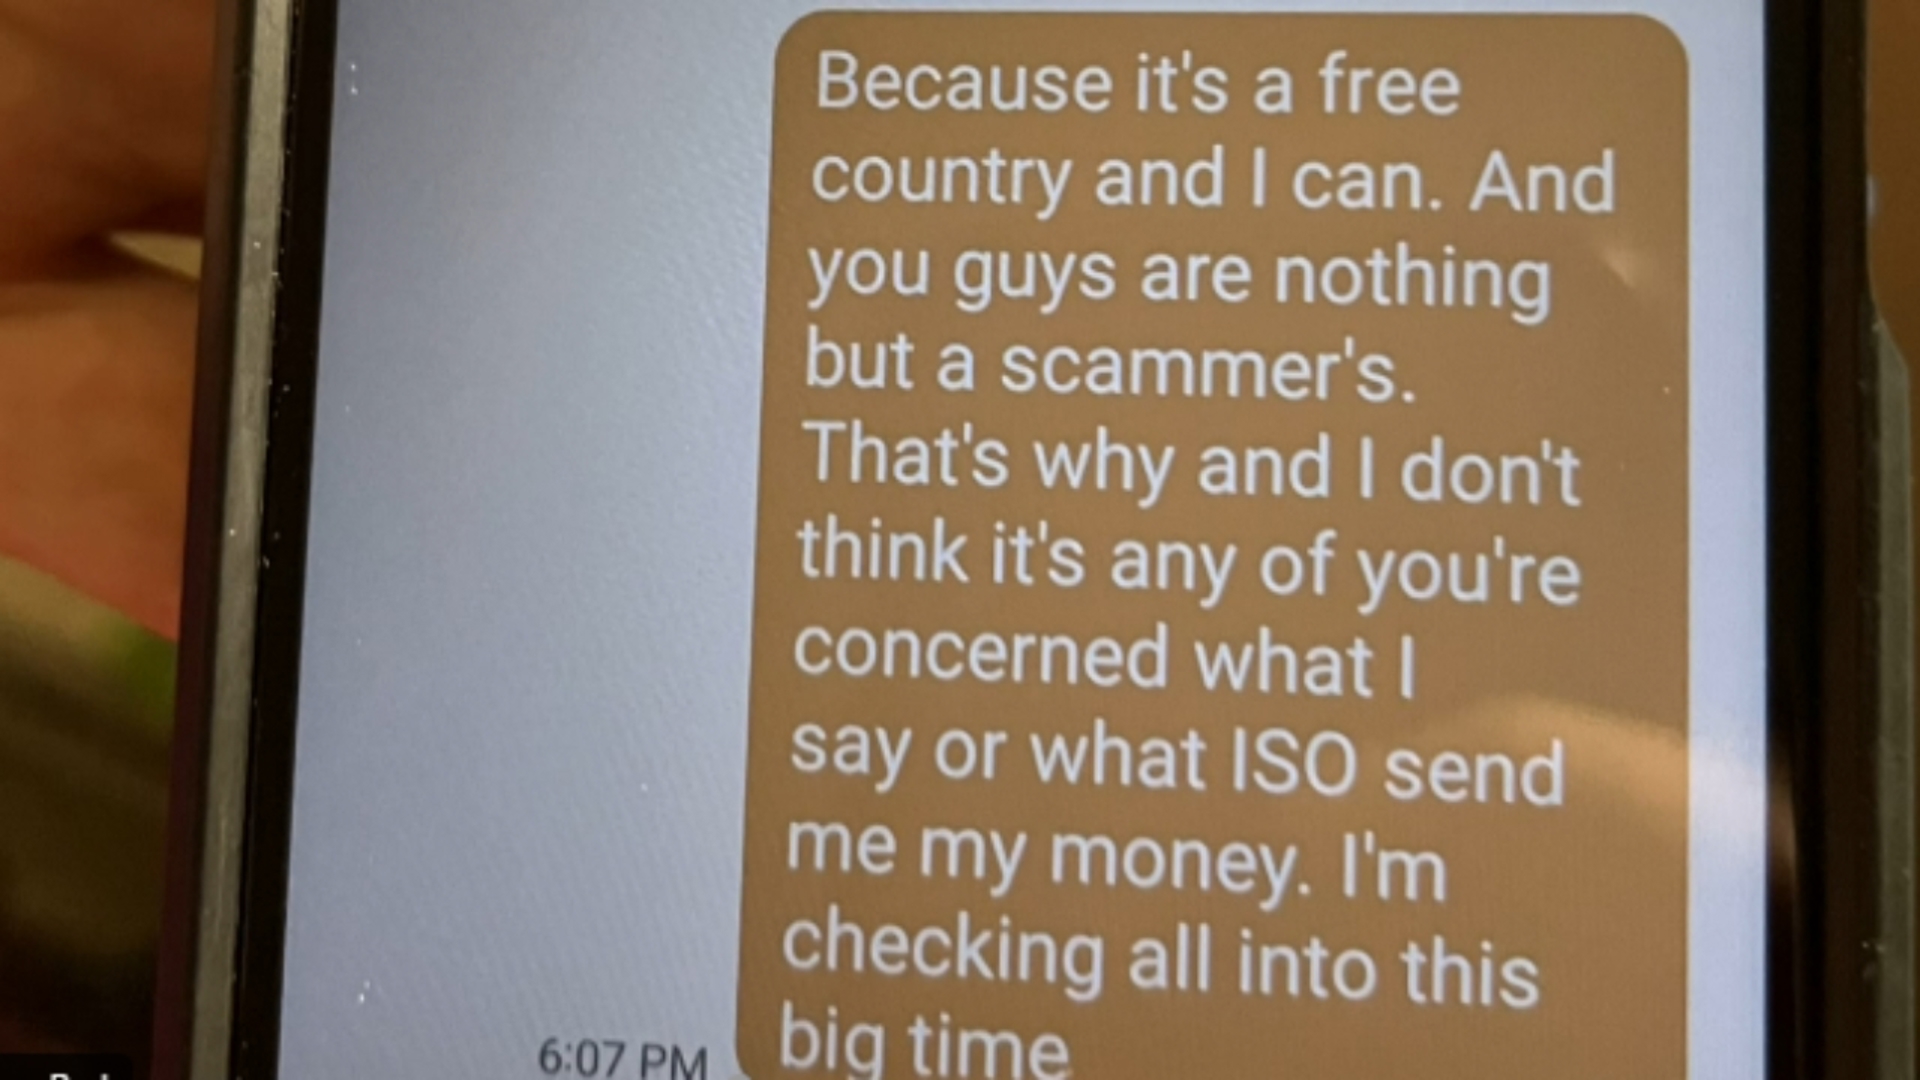 For one Valley resident, a scammer pretended to be from Publisher's Clearing House.